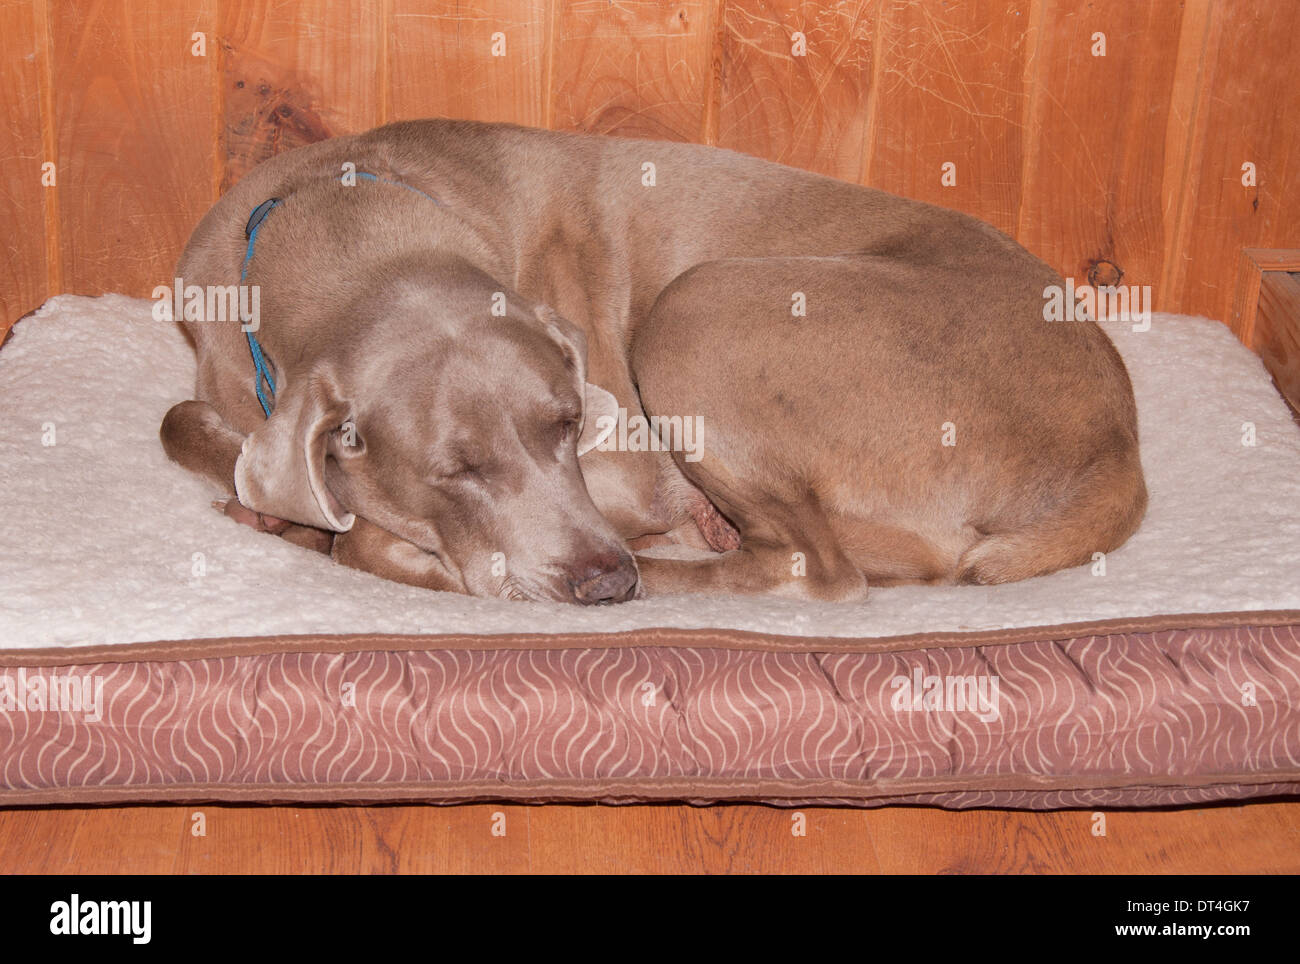 Old dog curled up, sleeping happily on his soft bed Stock Photo